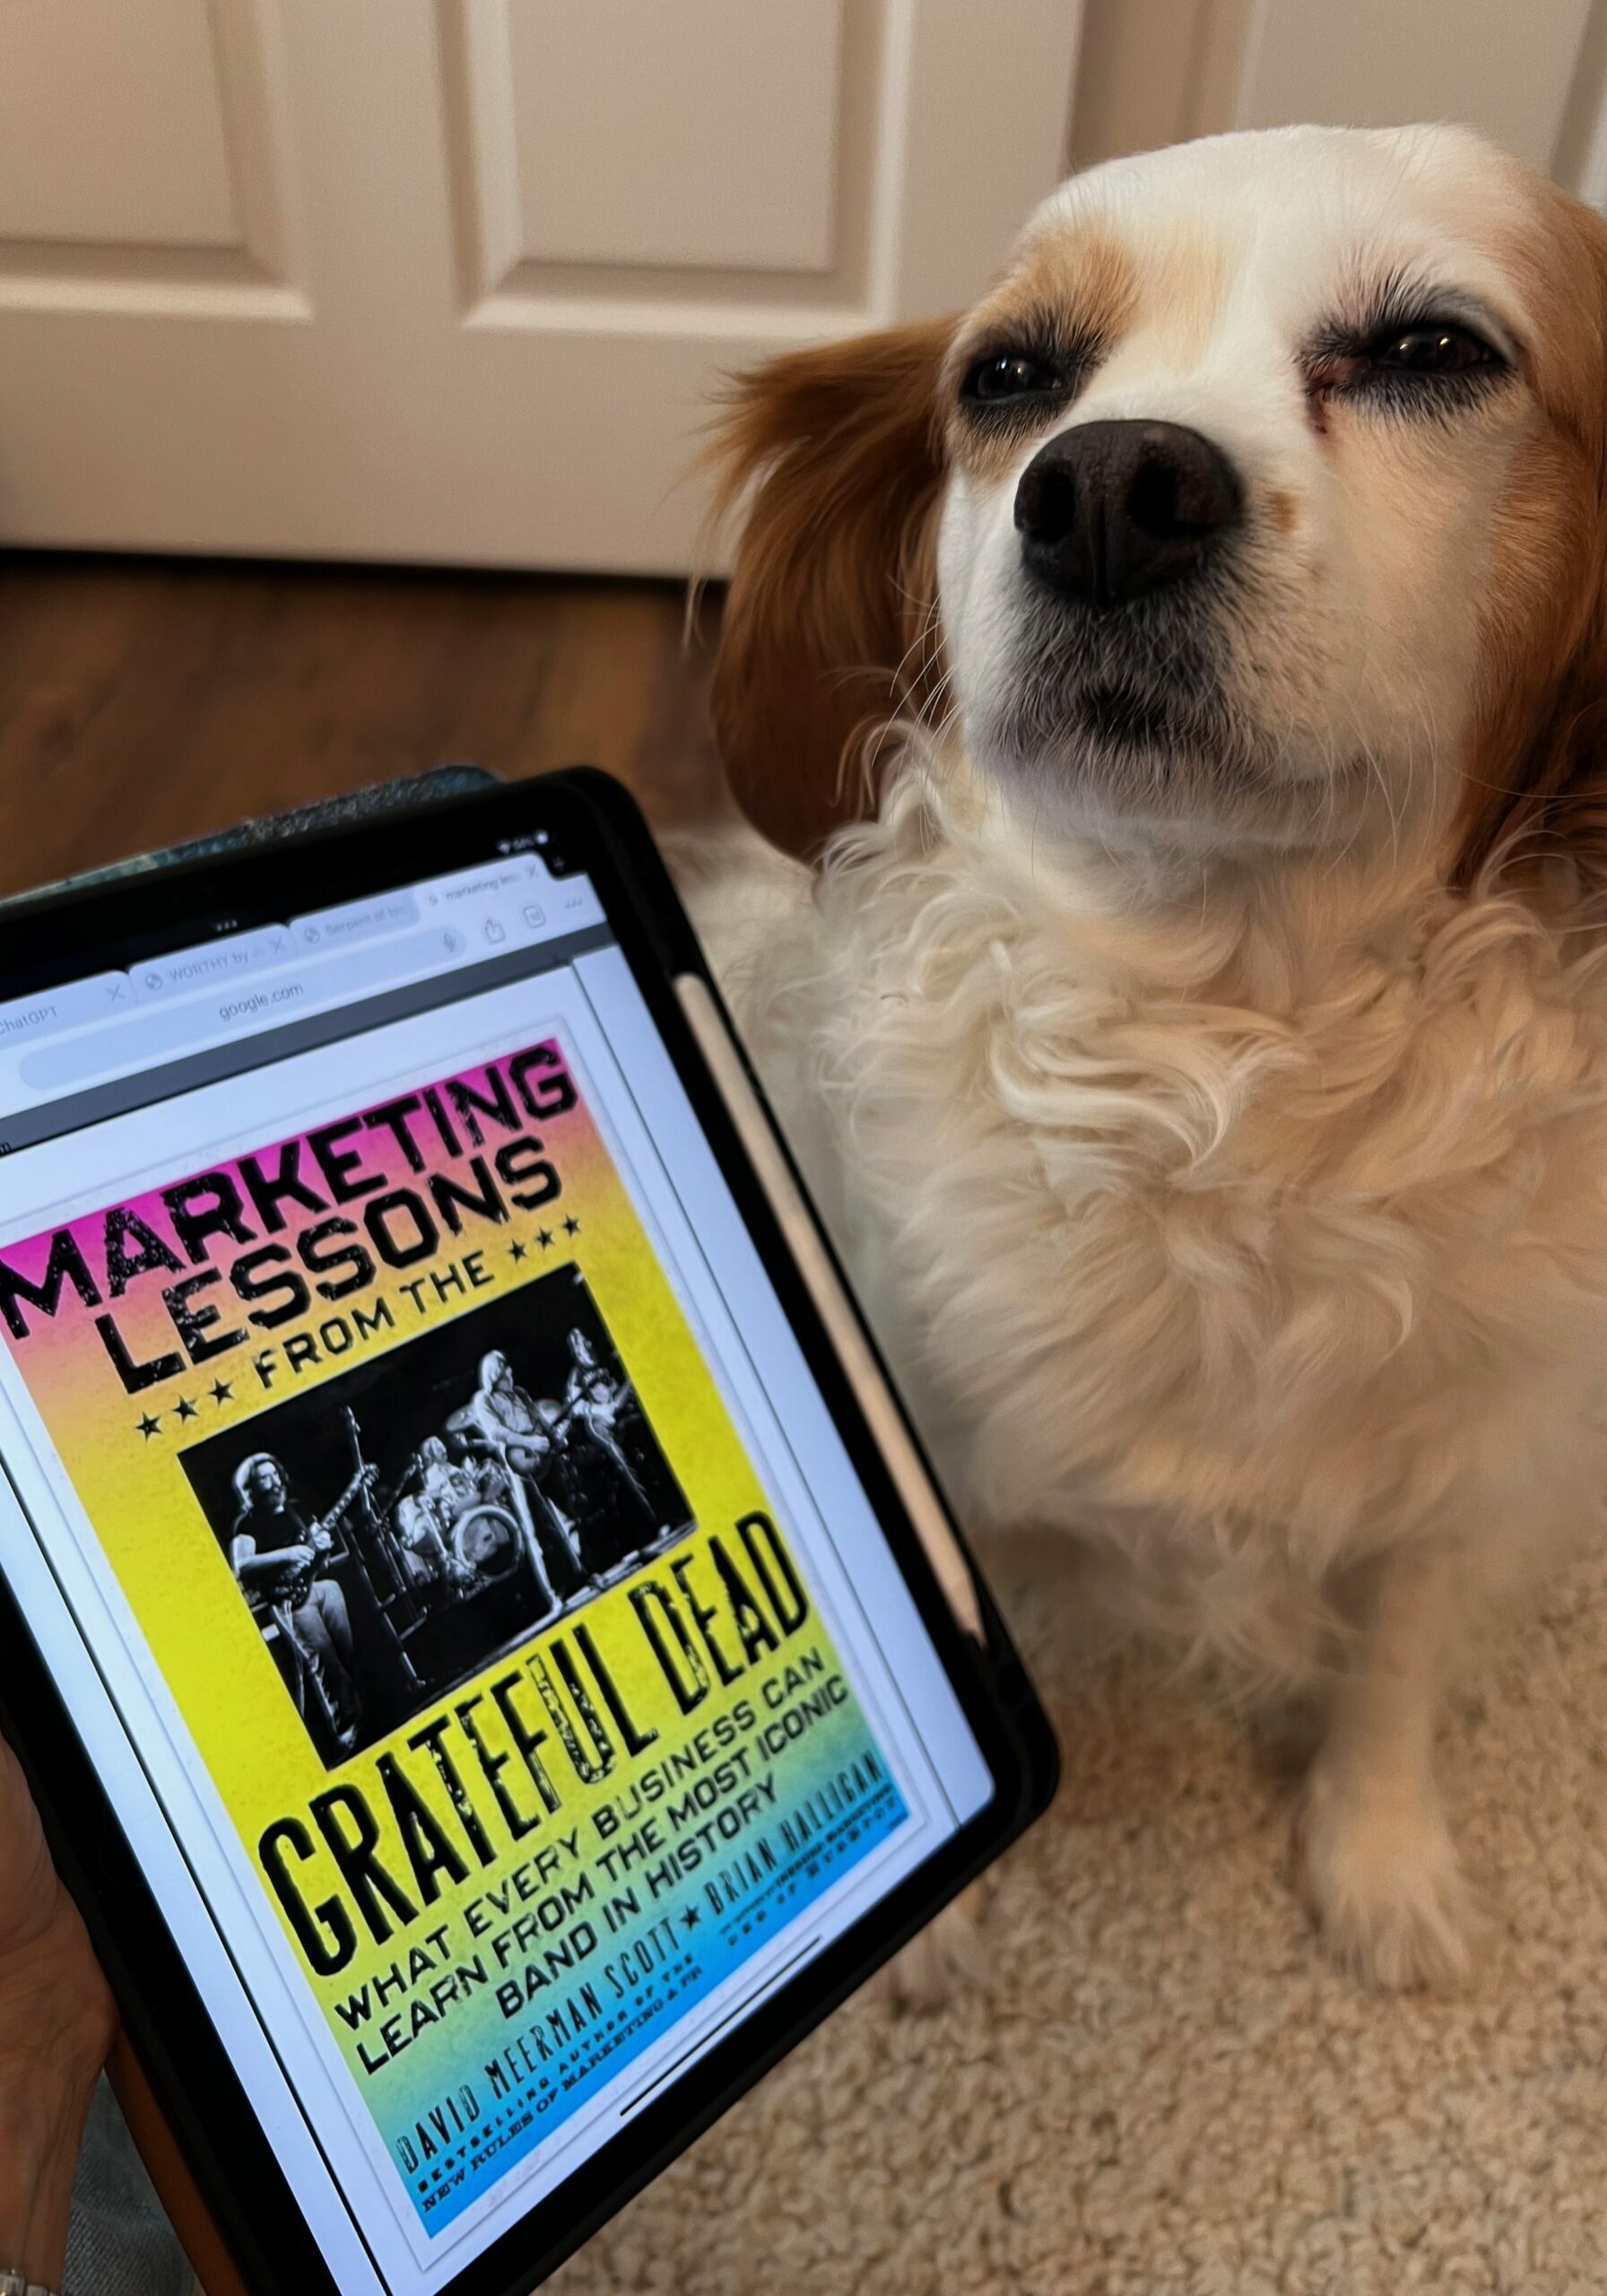 The Grateful Dead Marketing Lessons